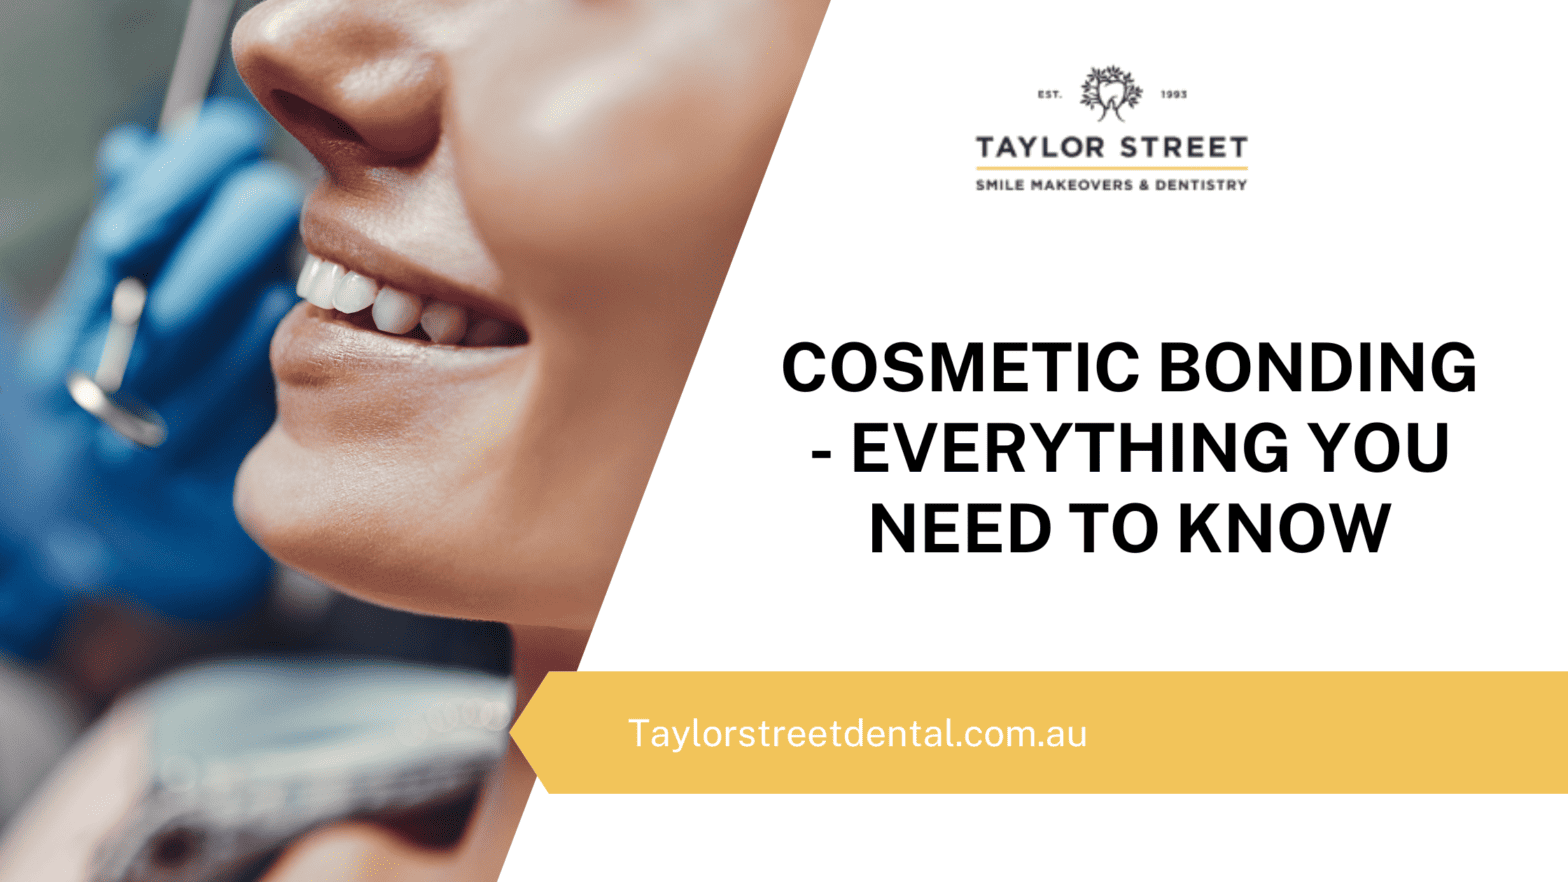 Cosmetic bonding everything you need to know